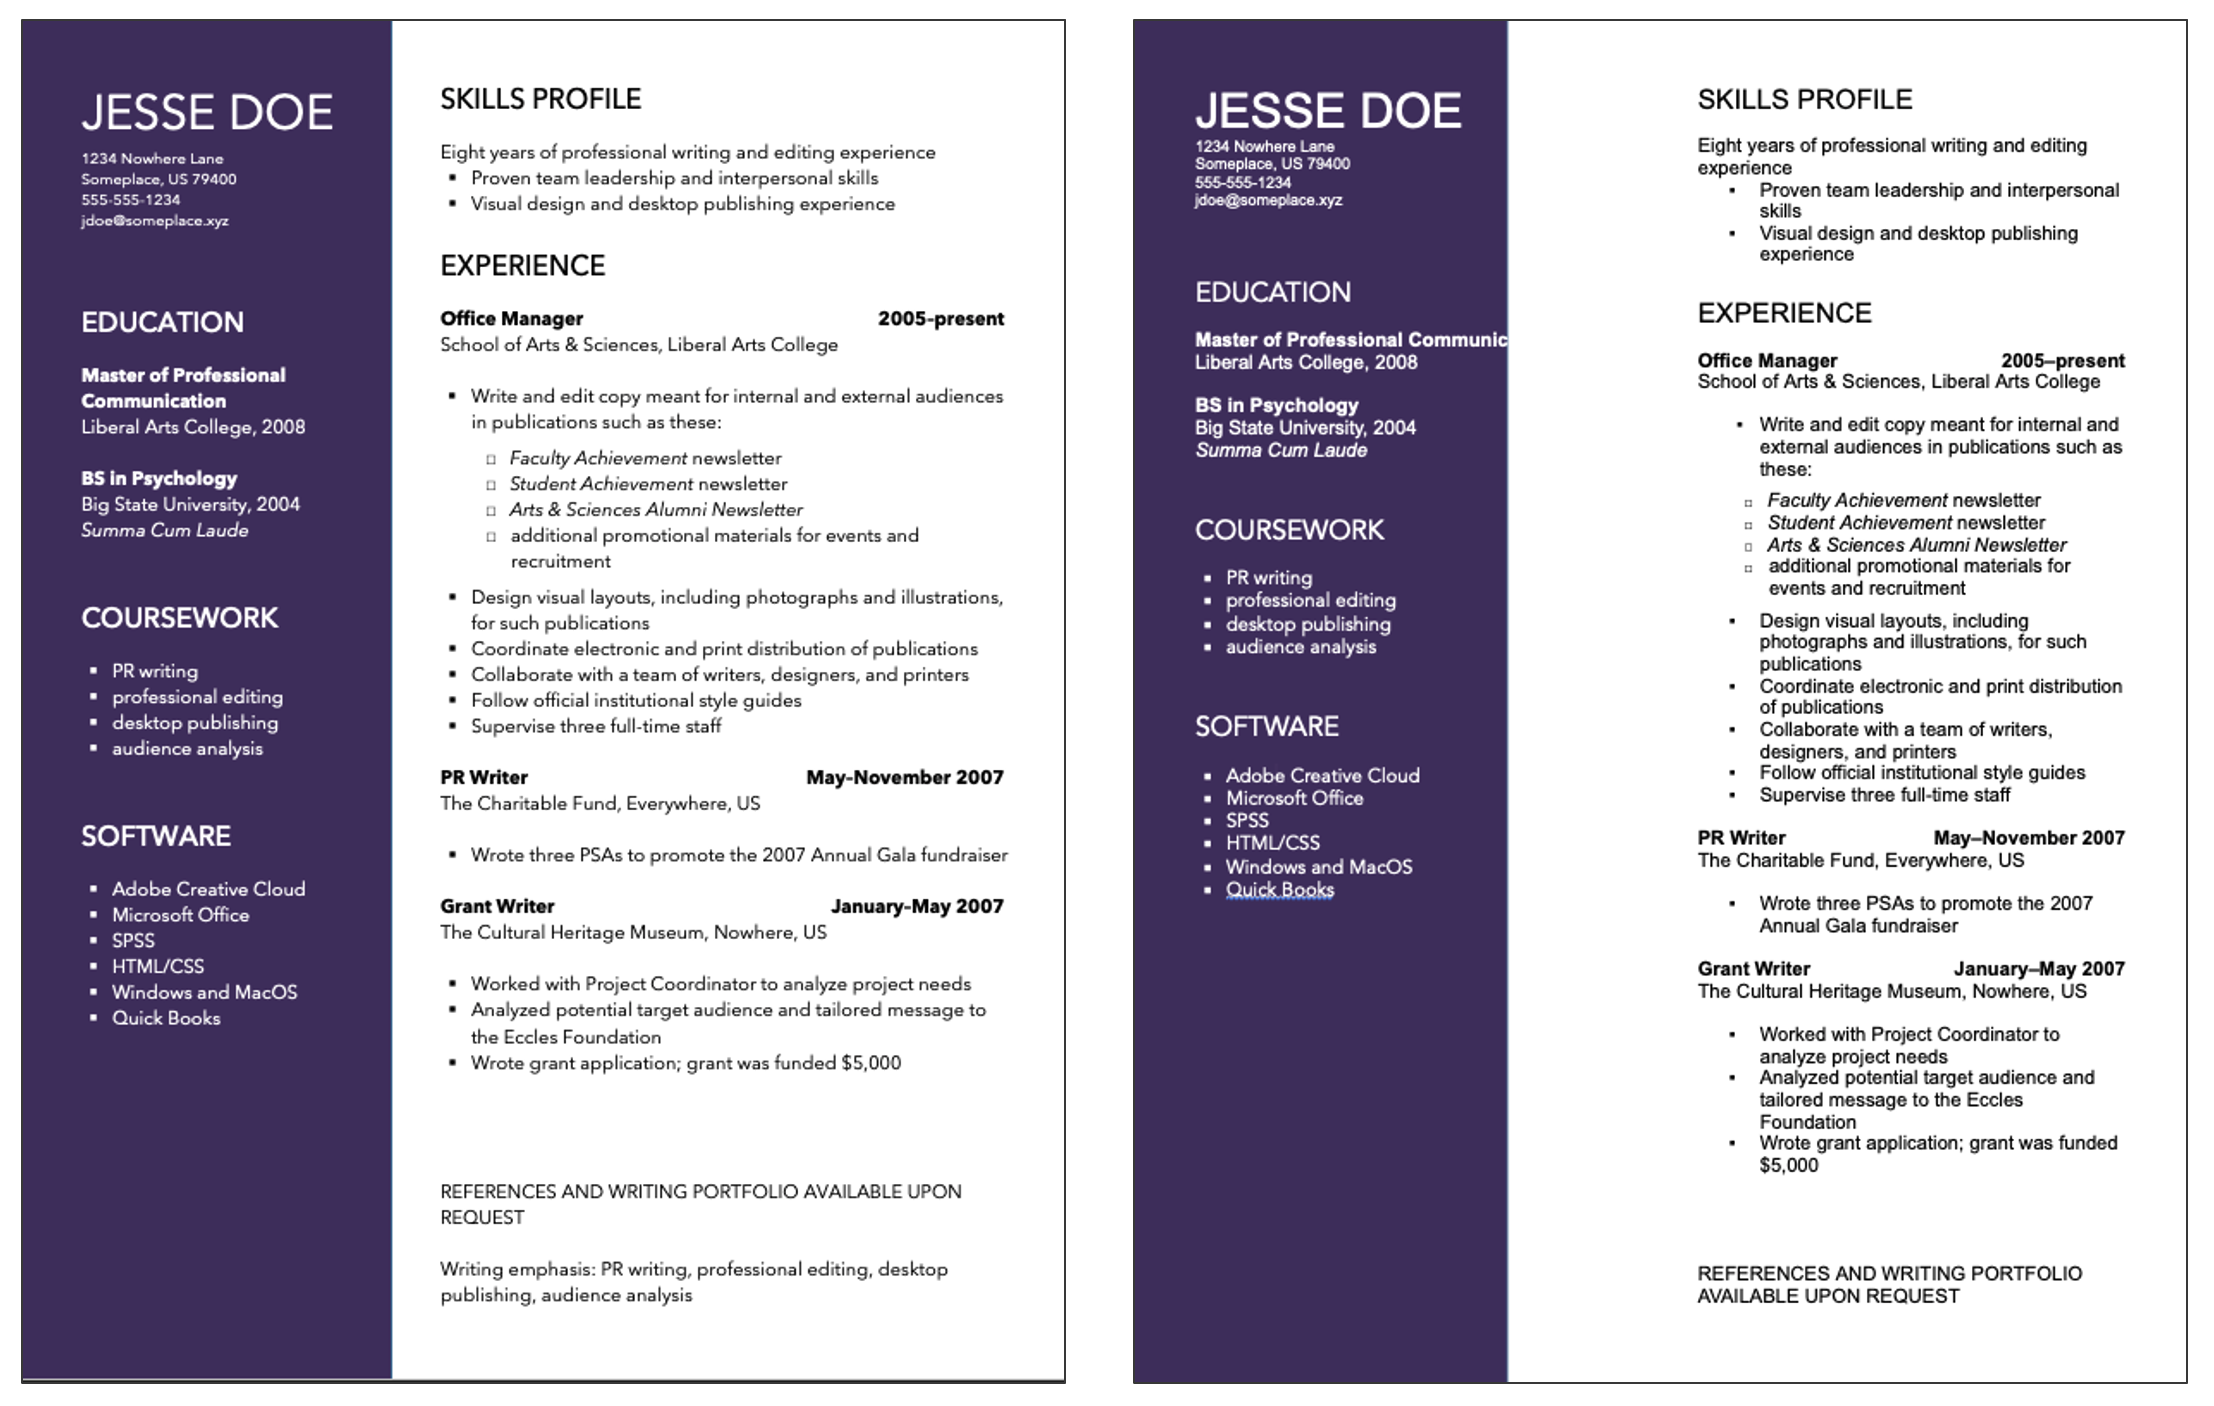 the same resume opened on two different computers